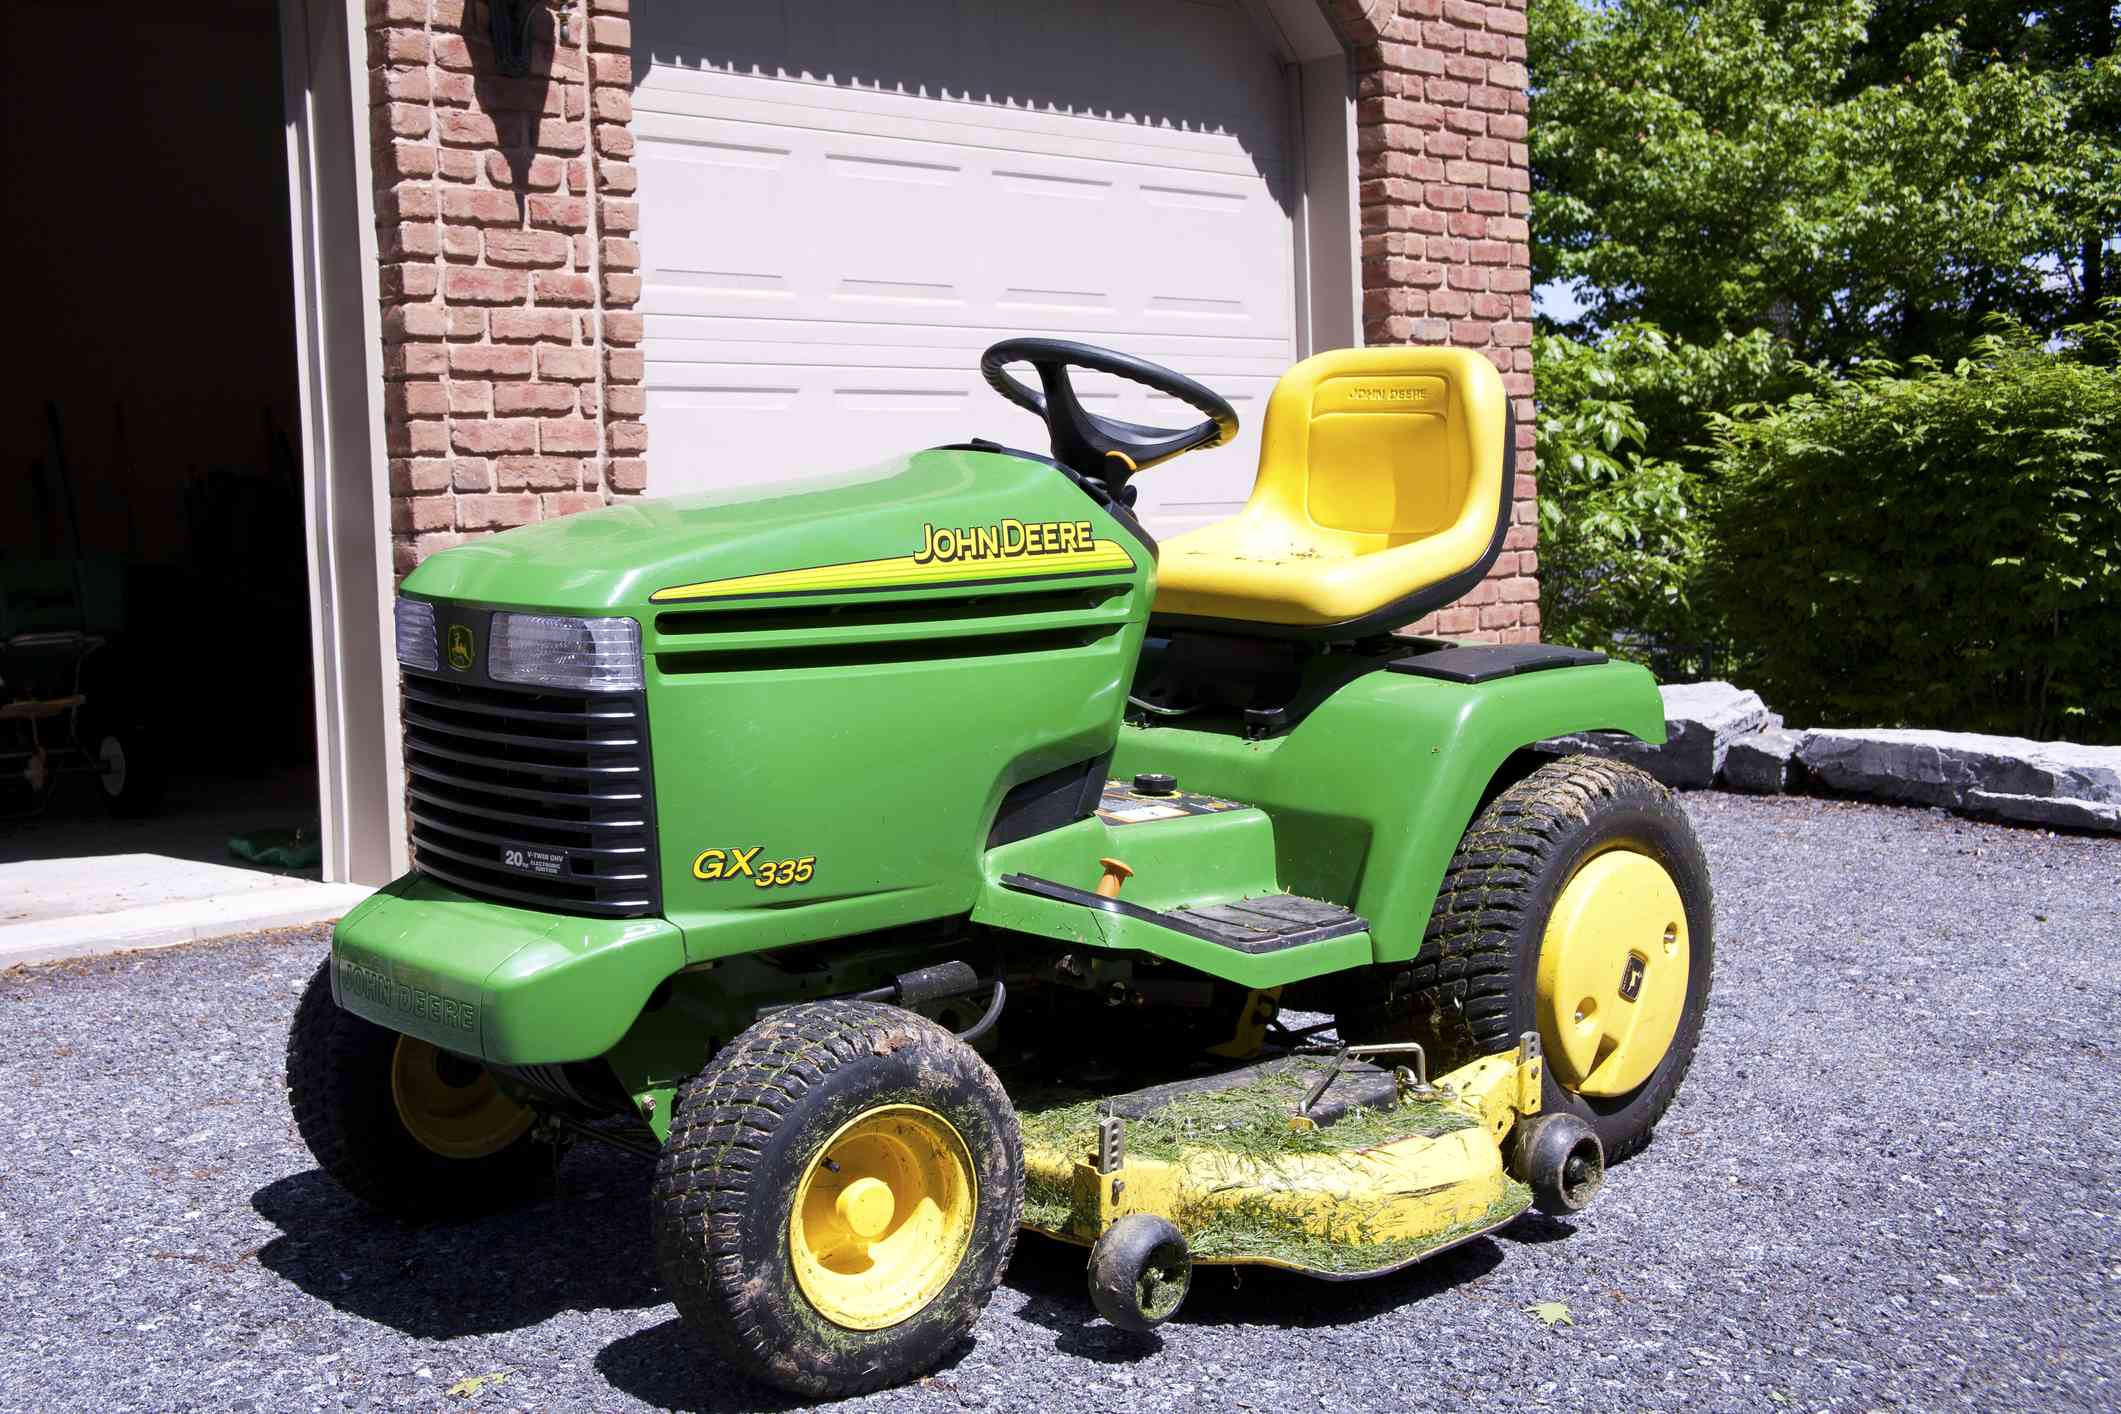 How to bypass safety switch on john deere lawn mower?